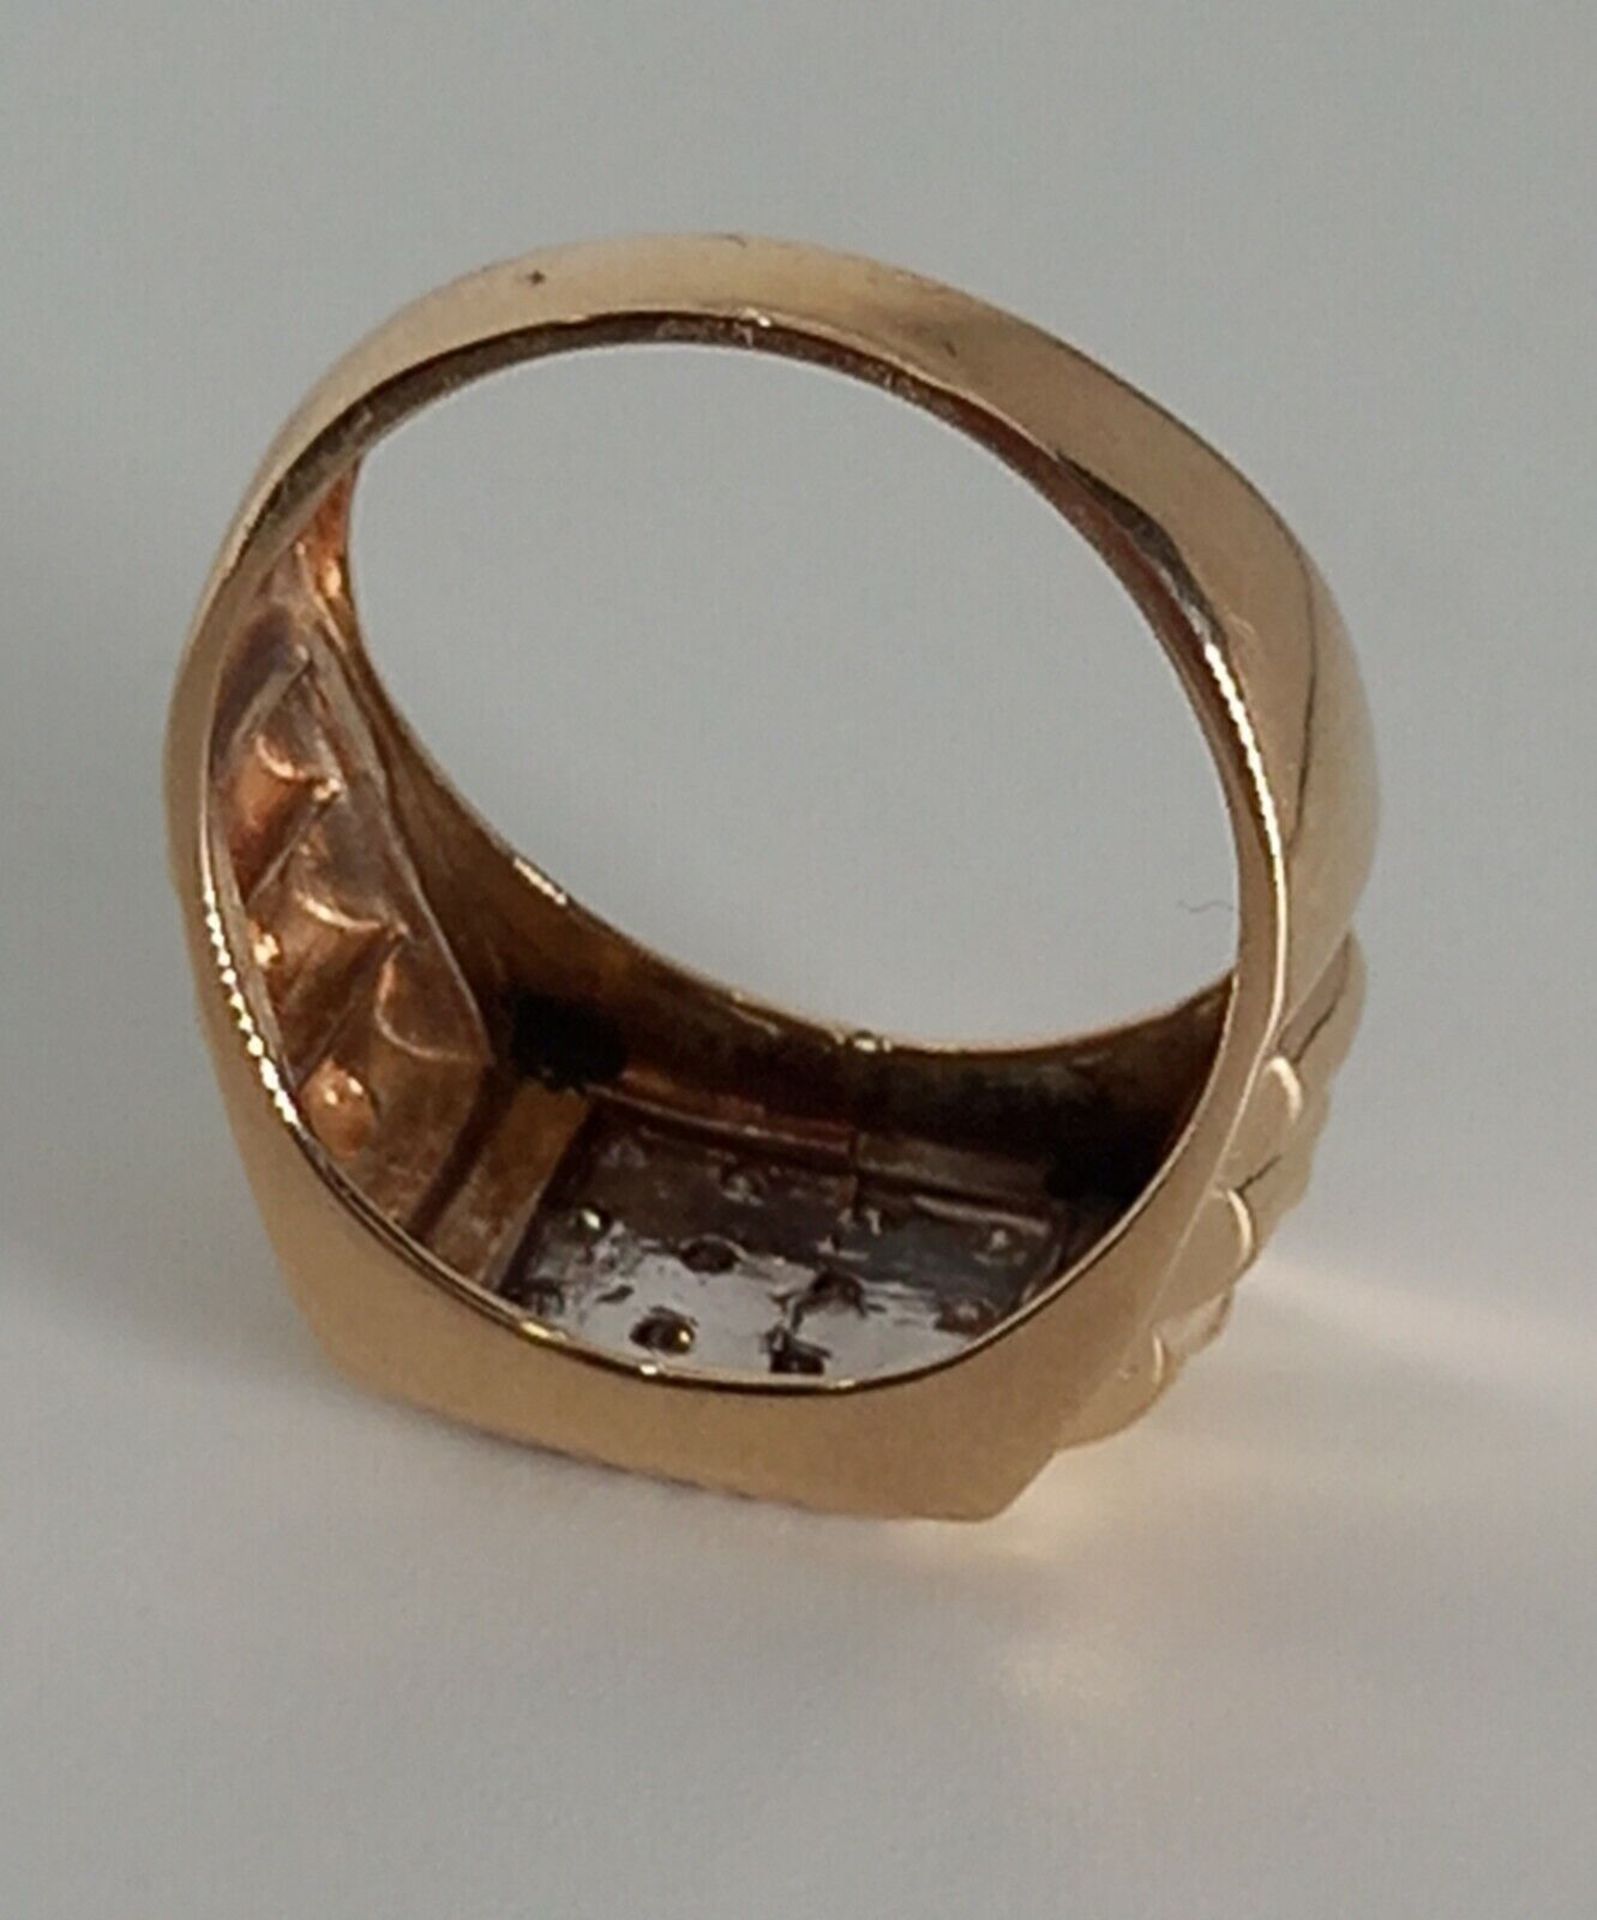 SIGNET RING FEATURES 16 DIAMONDS IN A LUX PAVE SETTING, ENCLAVED IN 9CT YELLOW GOLD - Image 3 of 5